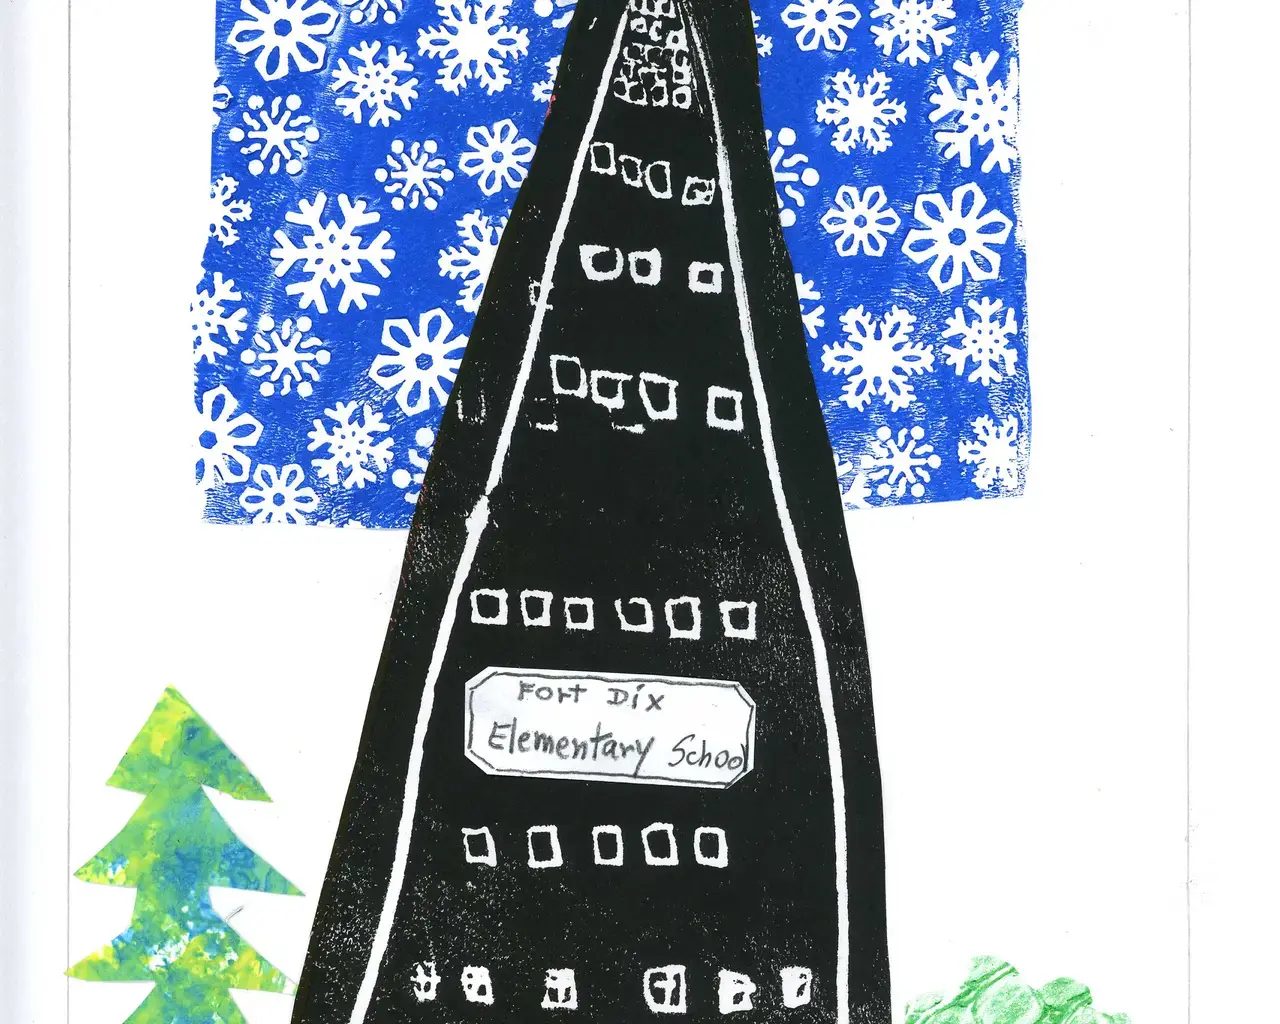 A print created by Noah Kolasinski in November 2012 when he was in third grade at Fort Dix Elementary School. Courtesy of Rosenbach Museum and Library.